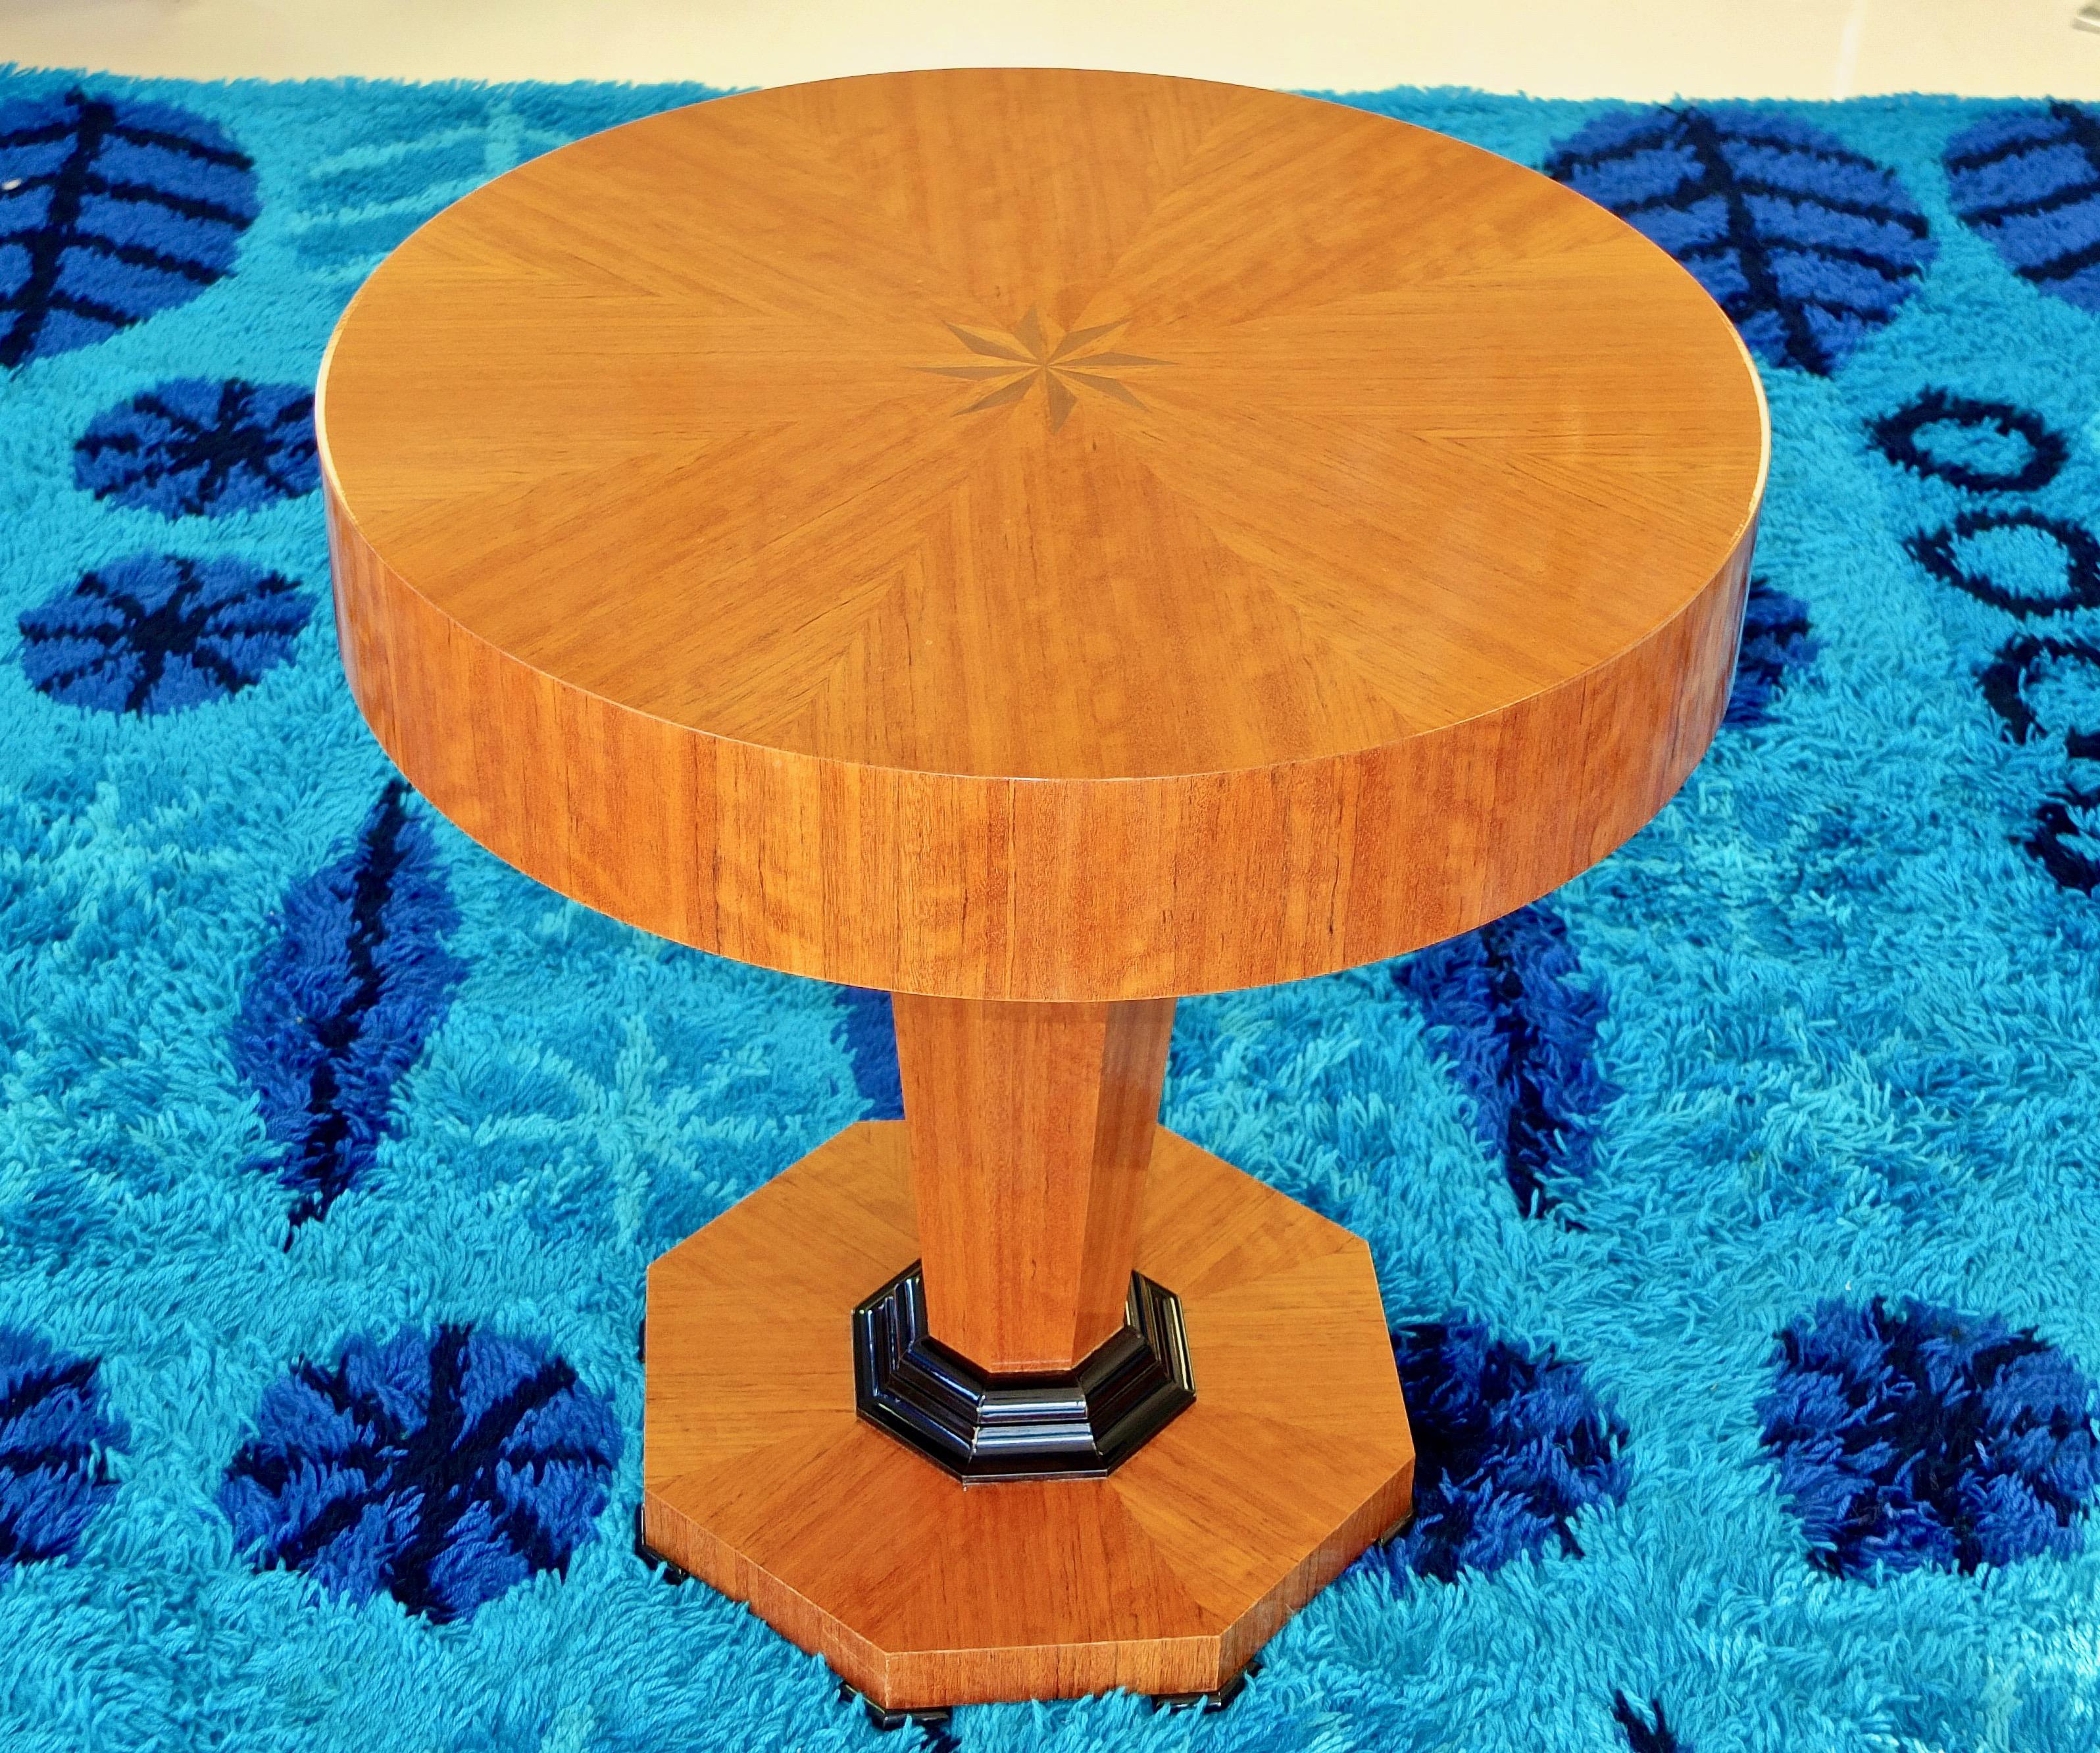 Studio Craft Tropical Olive Wood Pedestal Table by Gregg Lipton In Good Condition For Sale In Hanover, MA